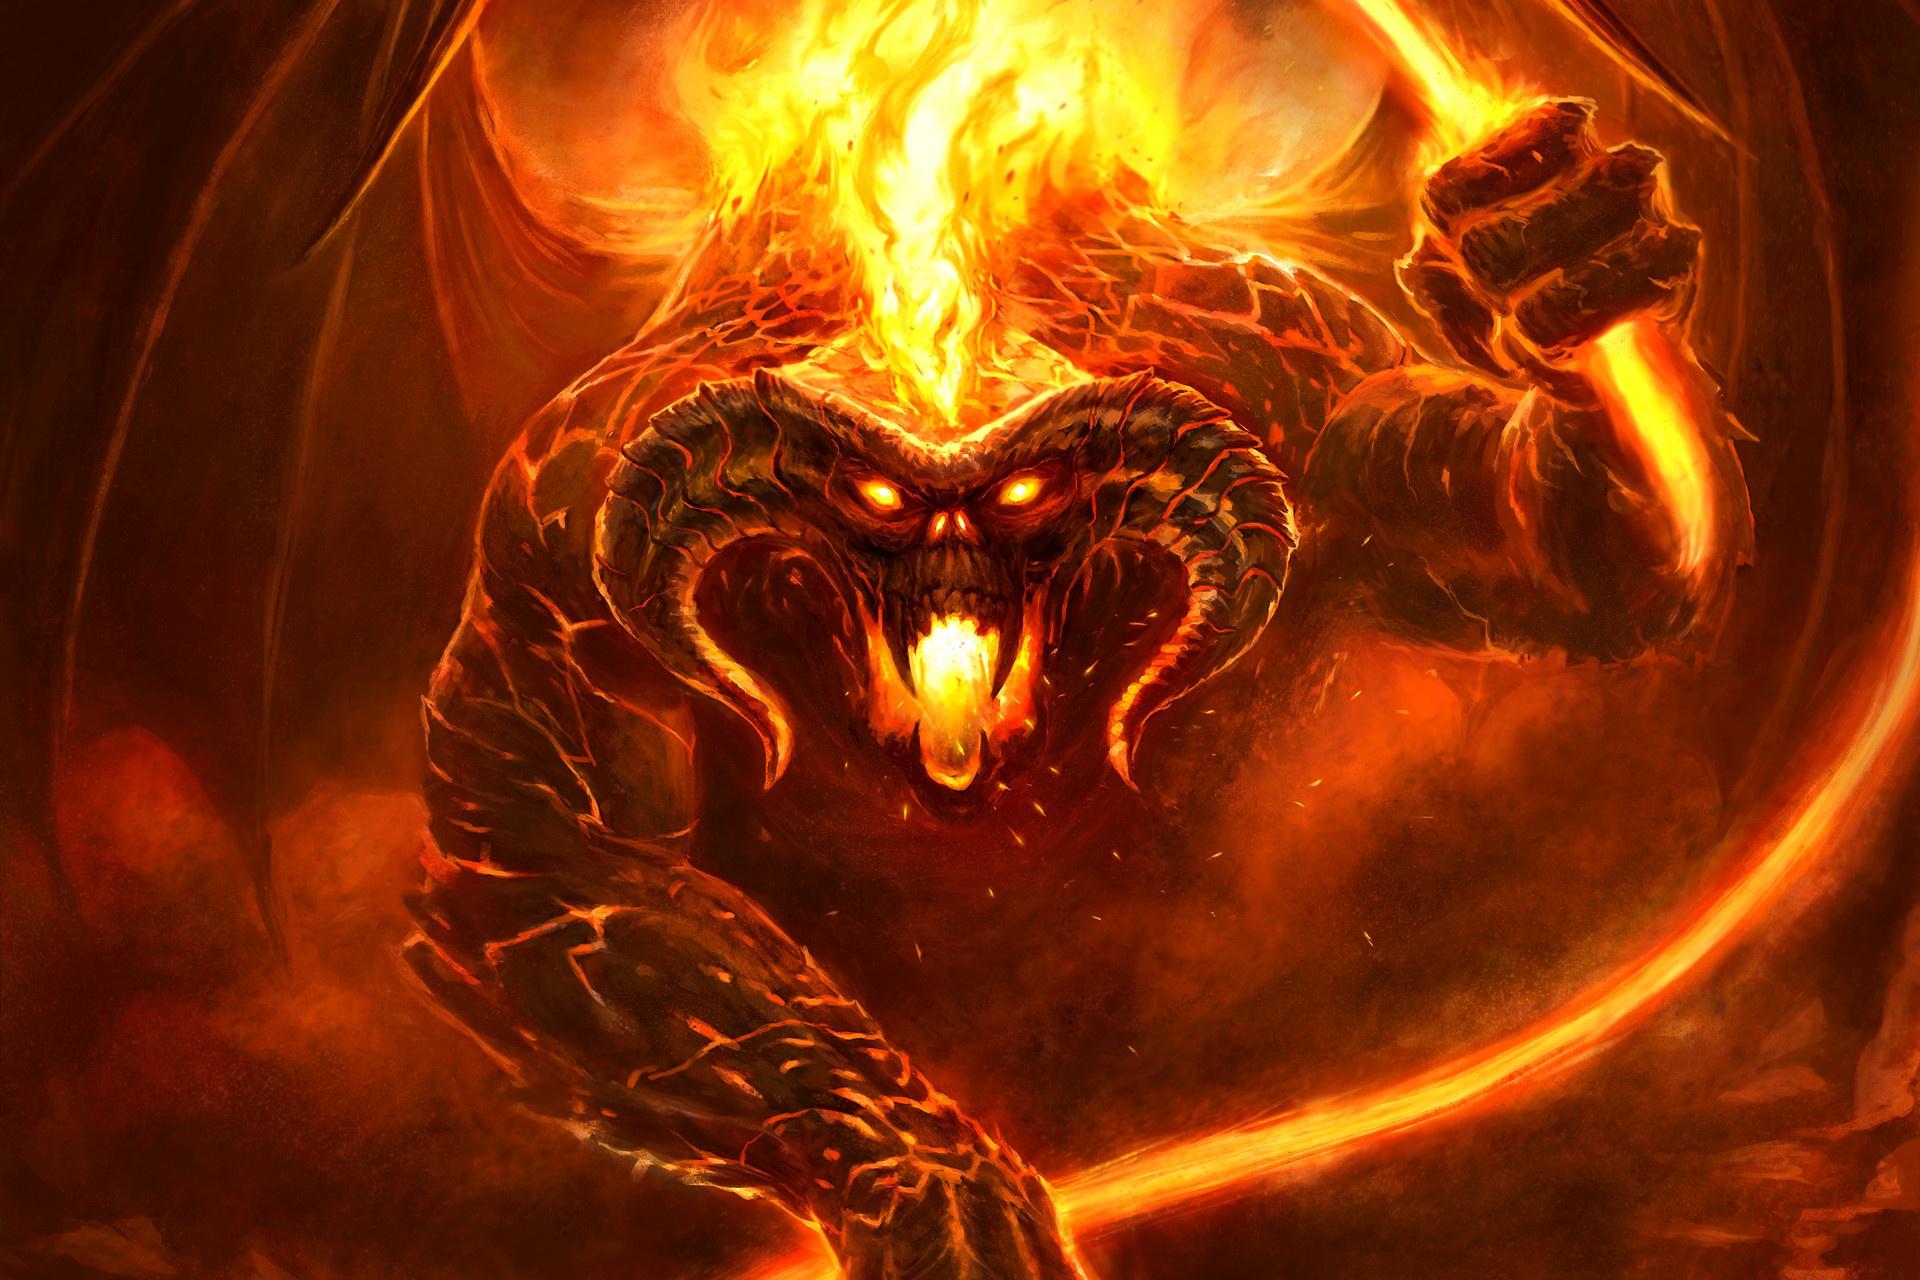 Balrog Demon Creature The Lord Of The Rings Fantasy Art Fire Burning 1920x1280